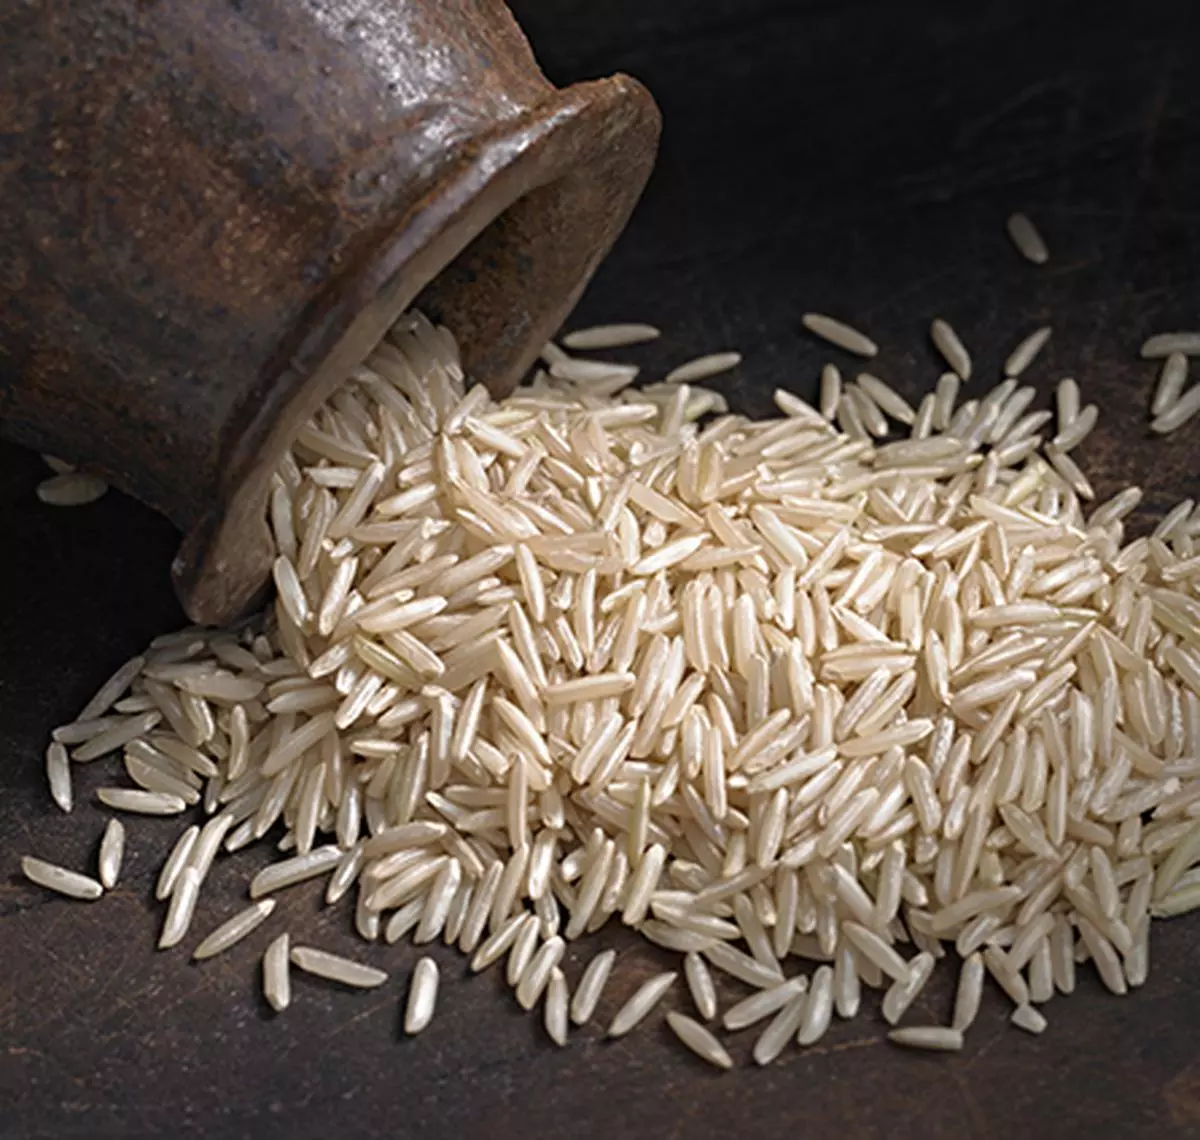 The All India Rice Exporters Association has urged the Centre not to implement FSSAI’s proposed MRL with regard to rice